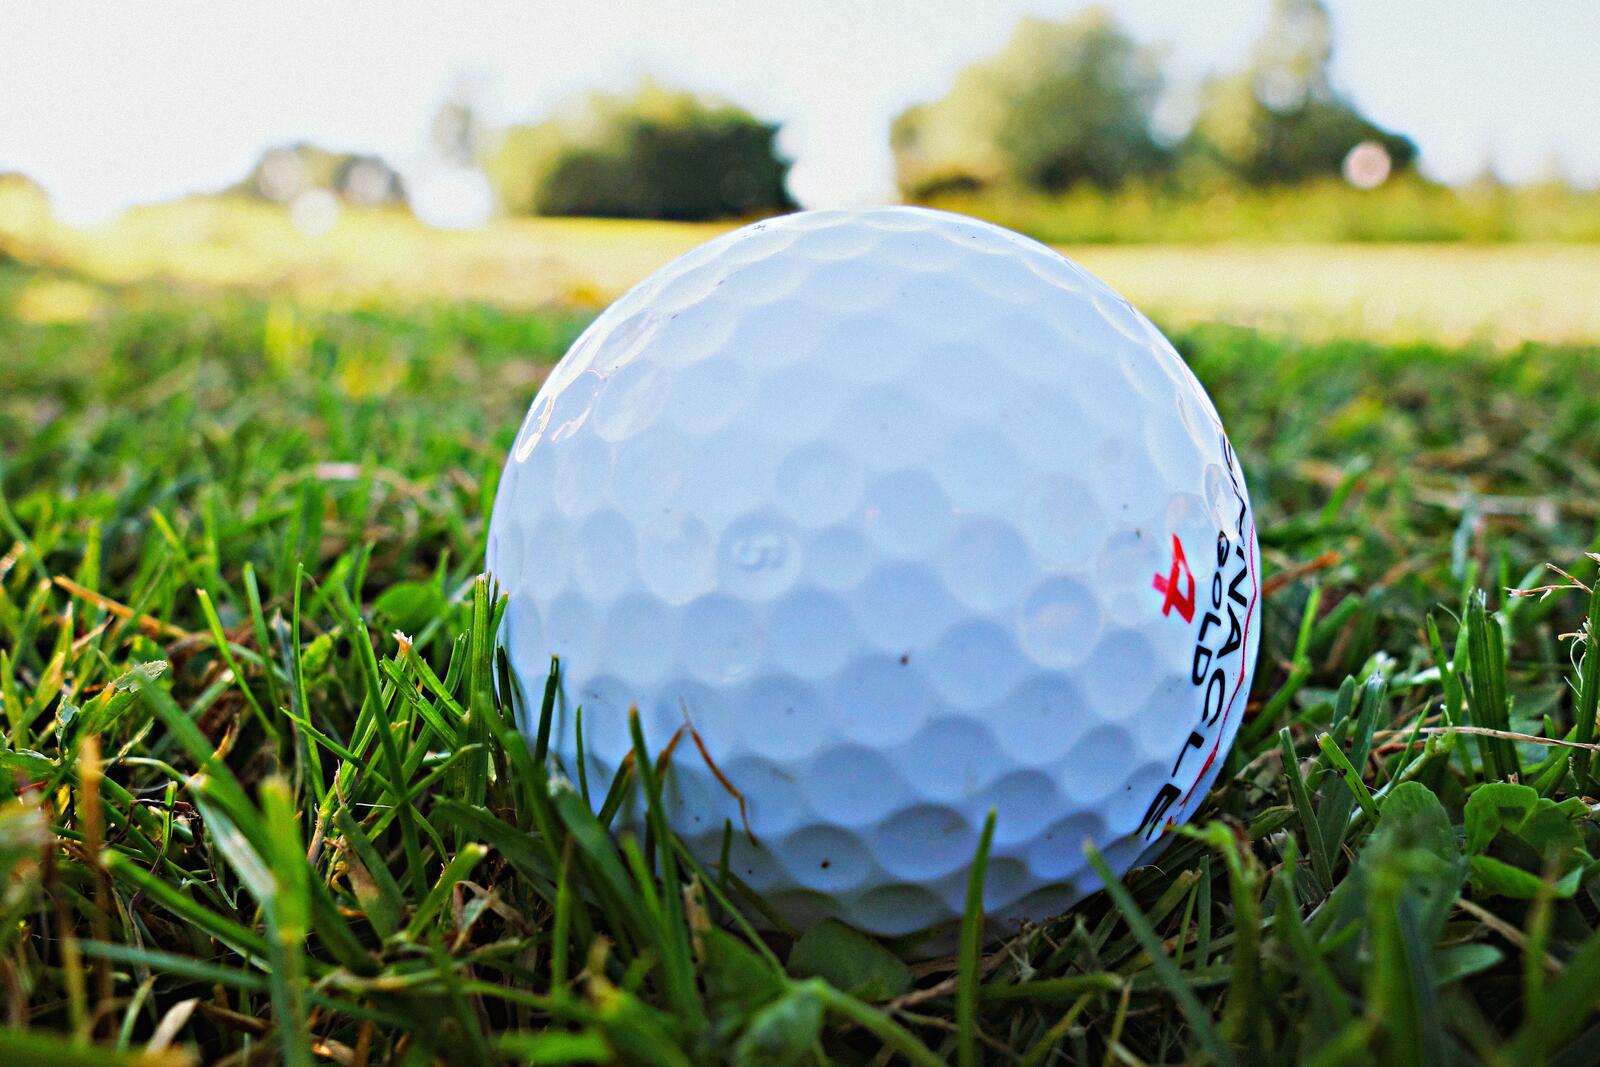 Free photo A golf ball on the green grass.